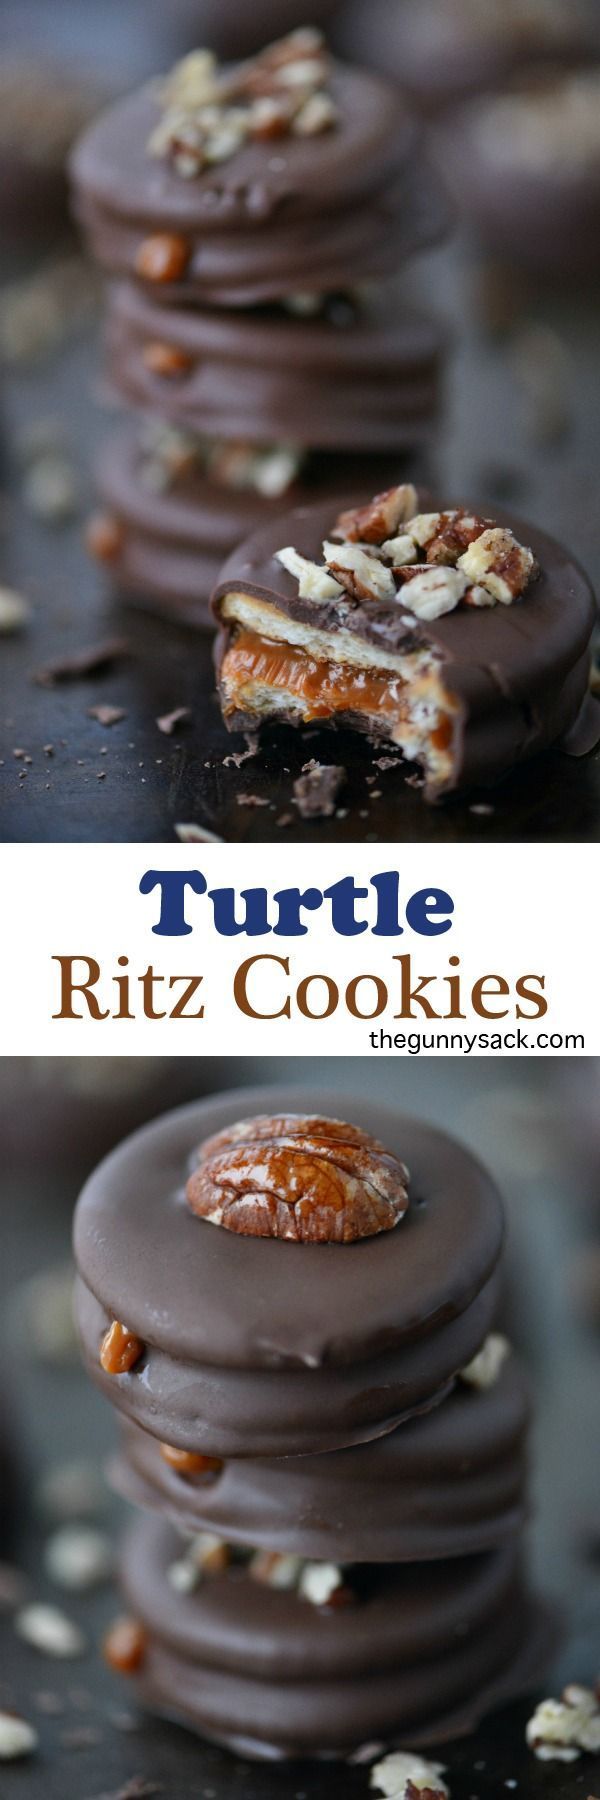 Turtle Ritz Cookies have a delicious layer of creamy caramel inside! Try them in a